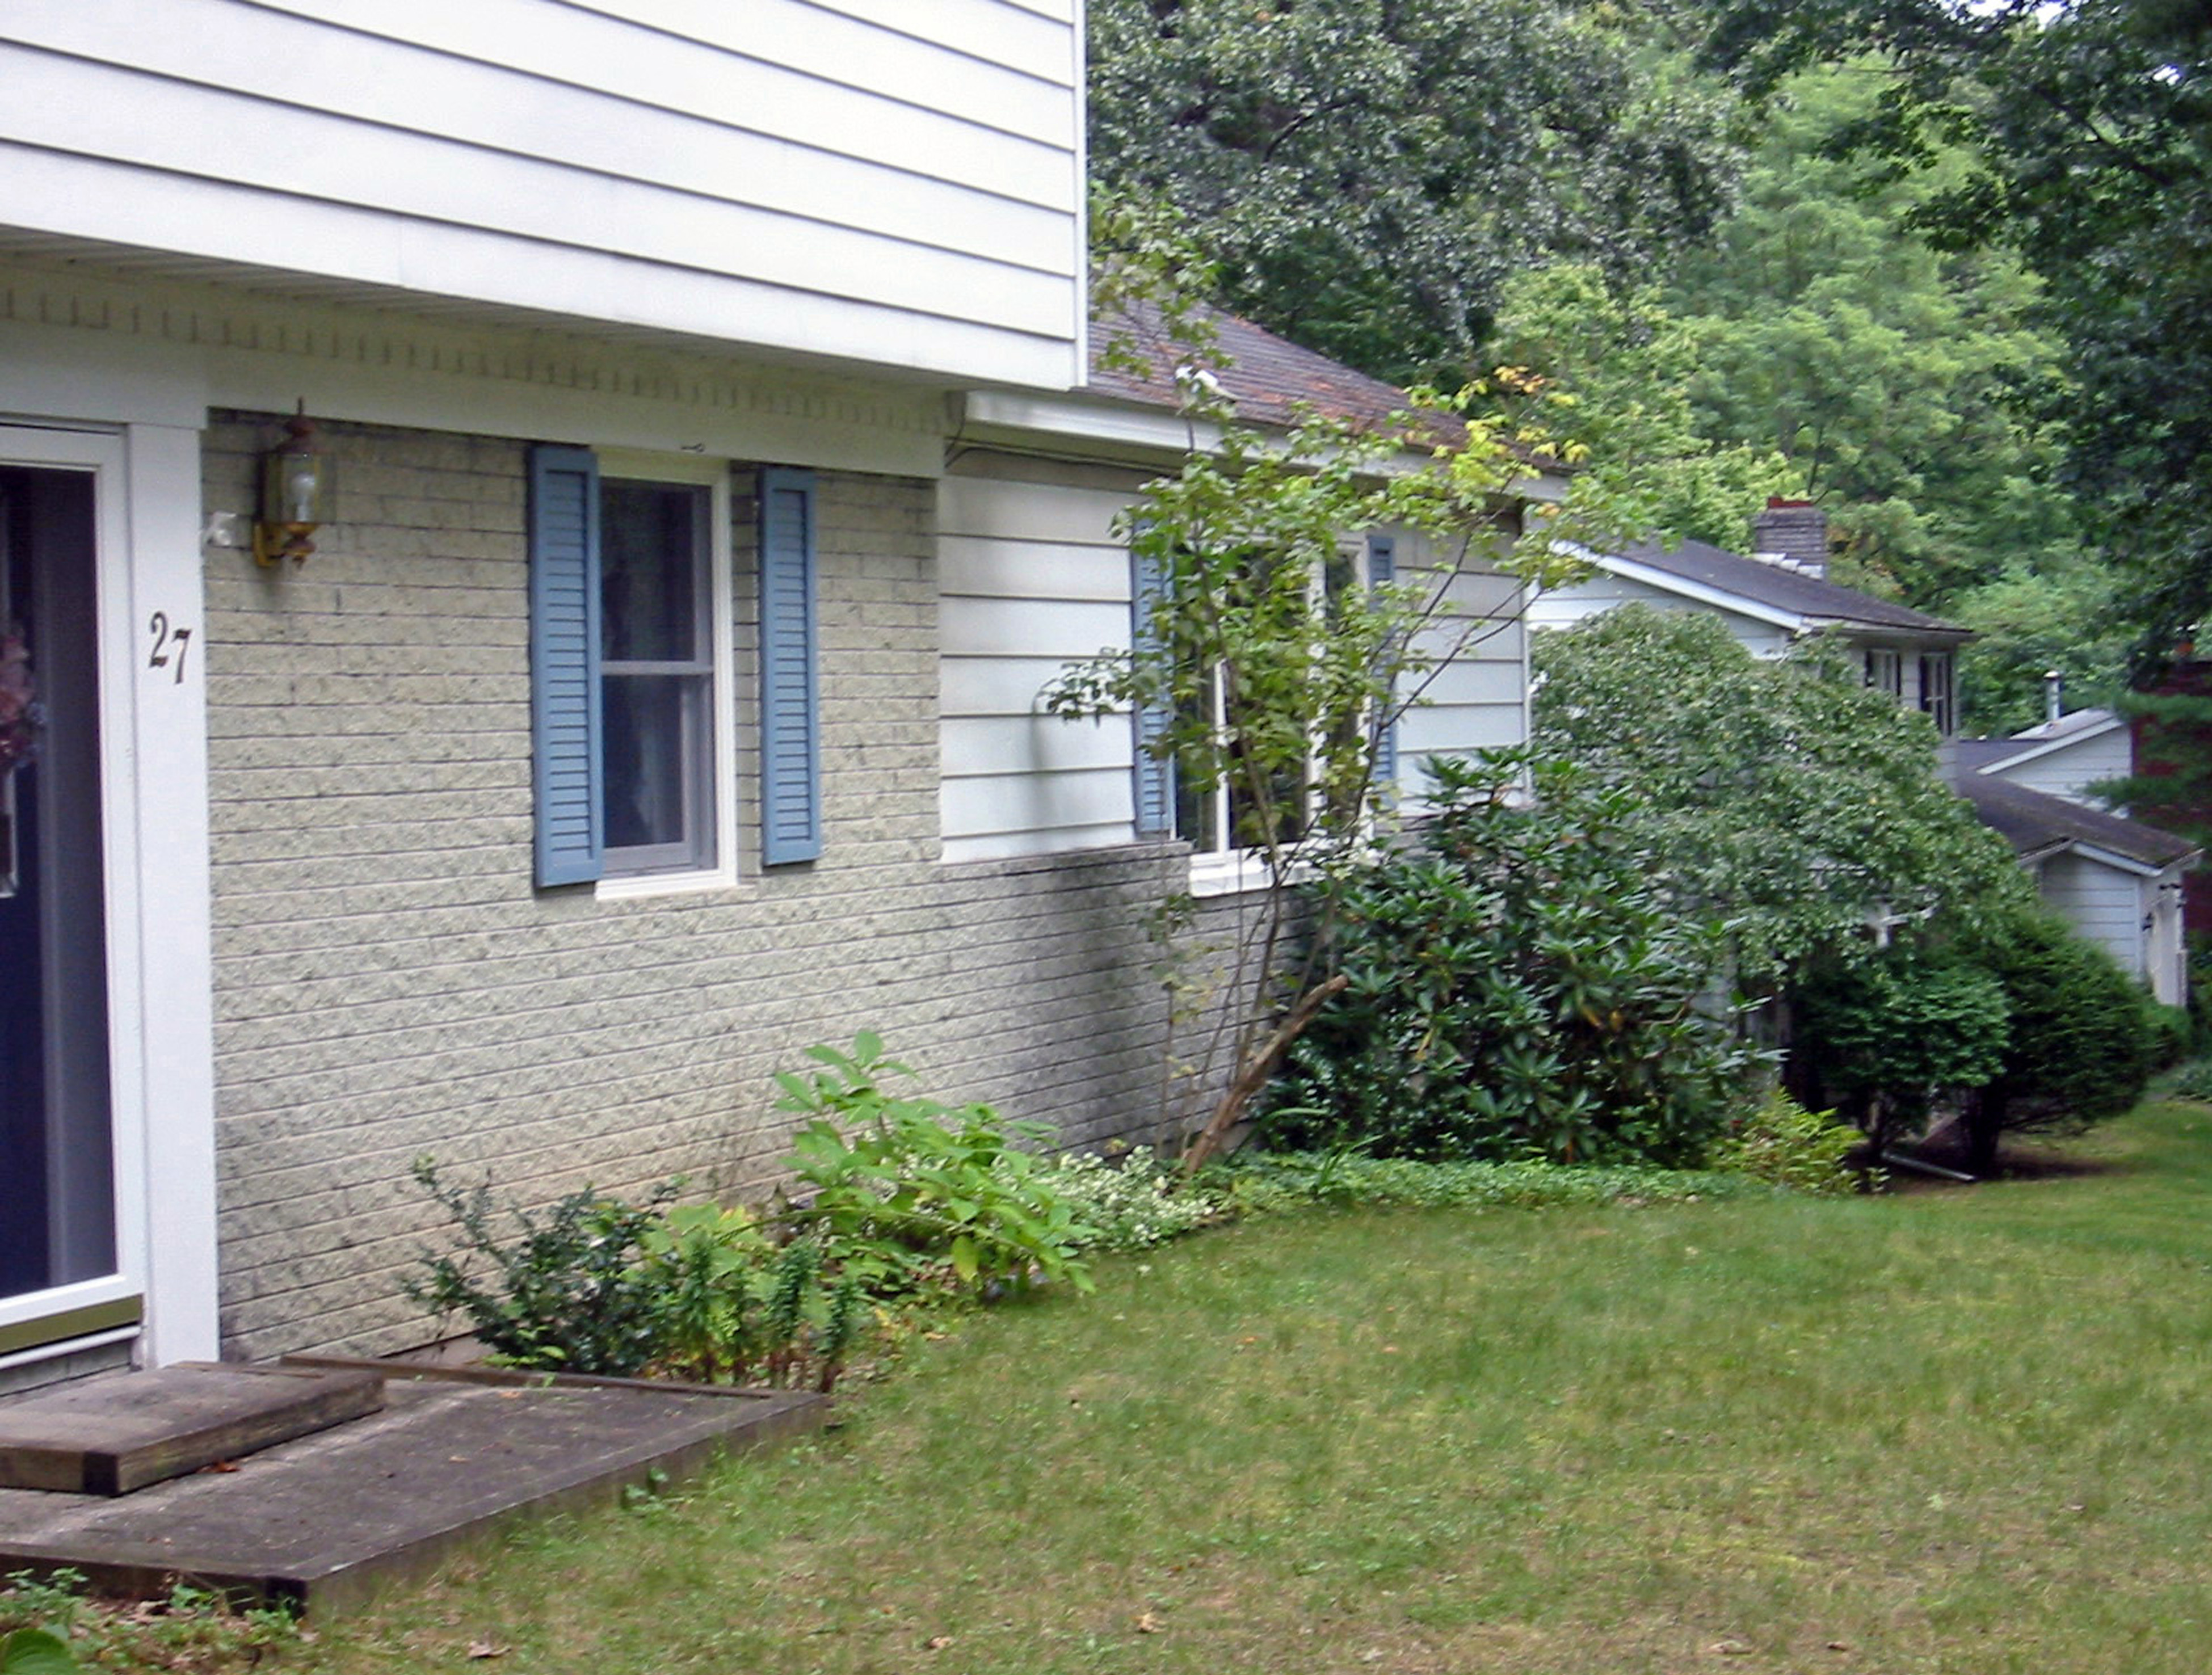 Thumbnail of before image of the front yard